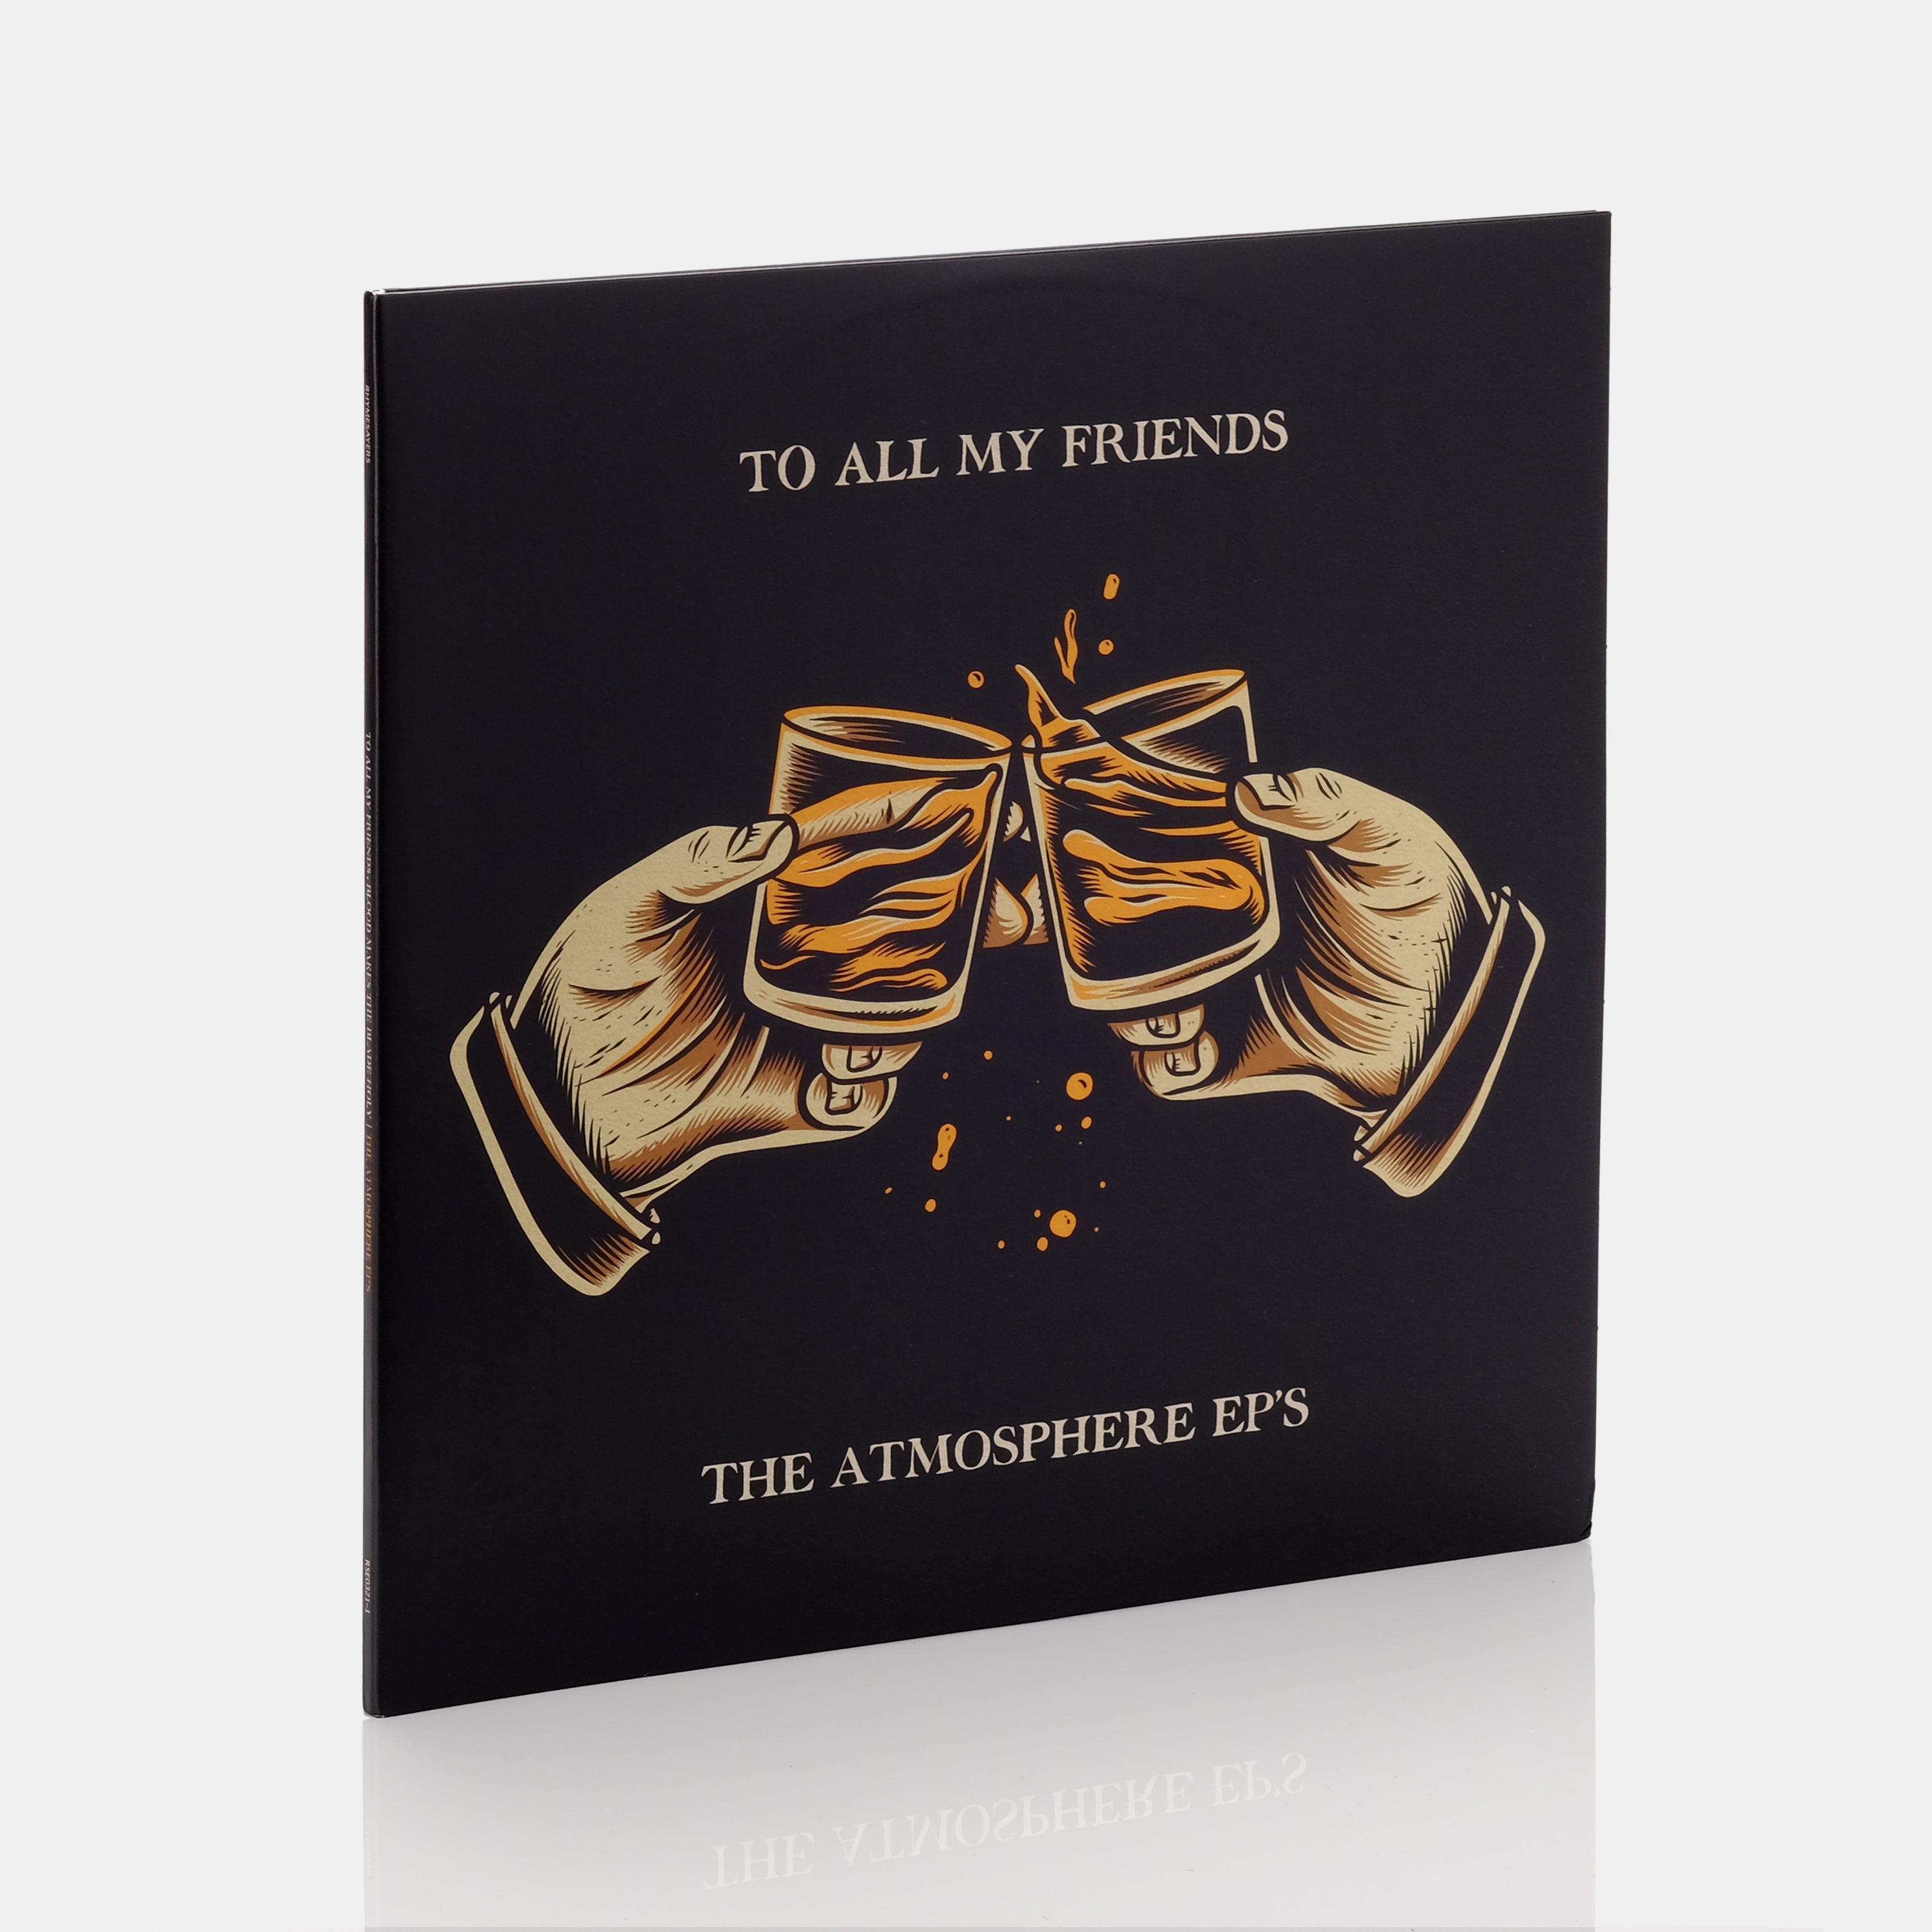 Atmosphere - To All My Friends, Blood Makes The Blade Holy: The Atmosphere EPs 2xLP Vinyl Record